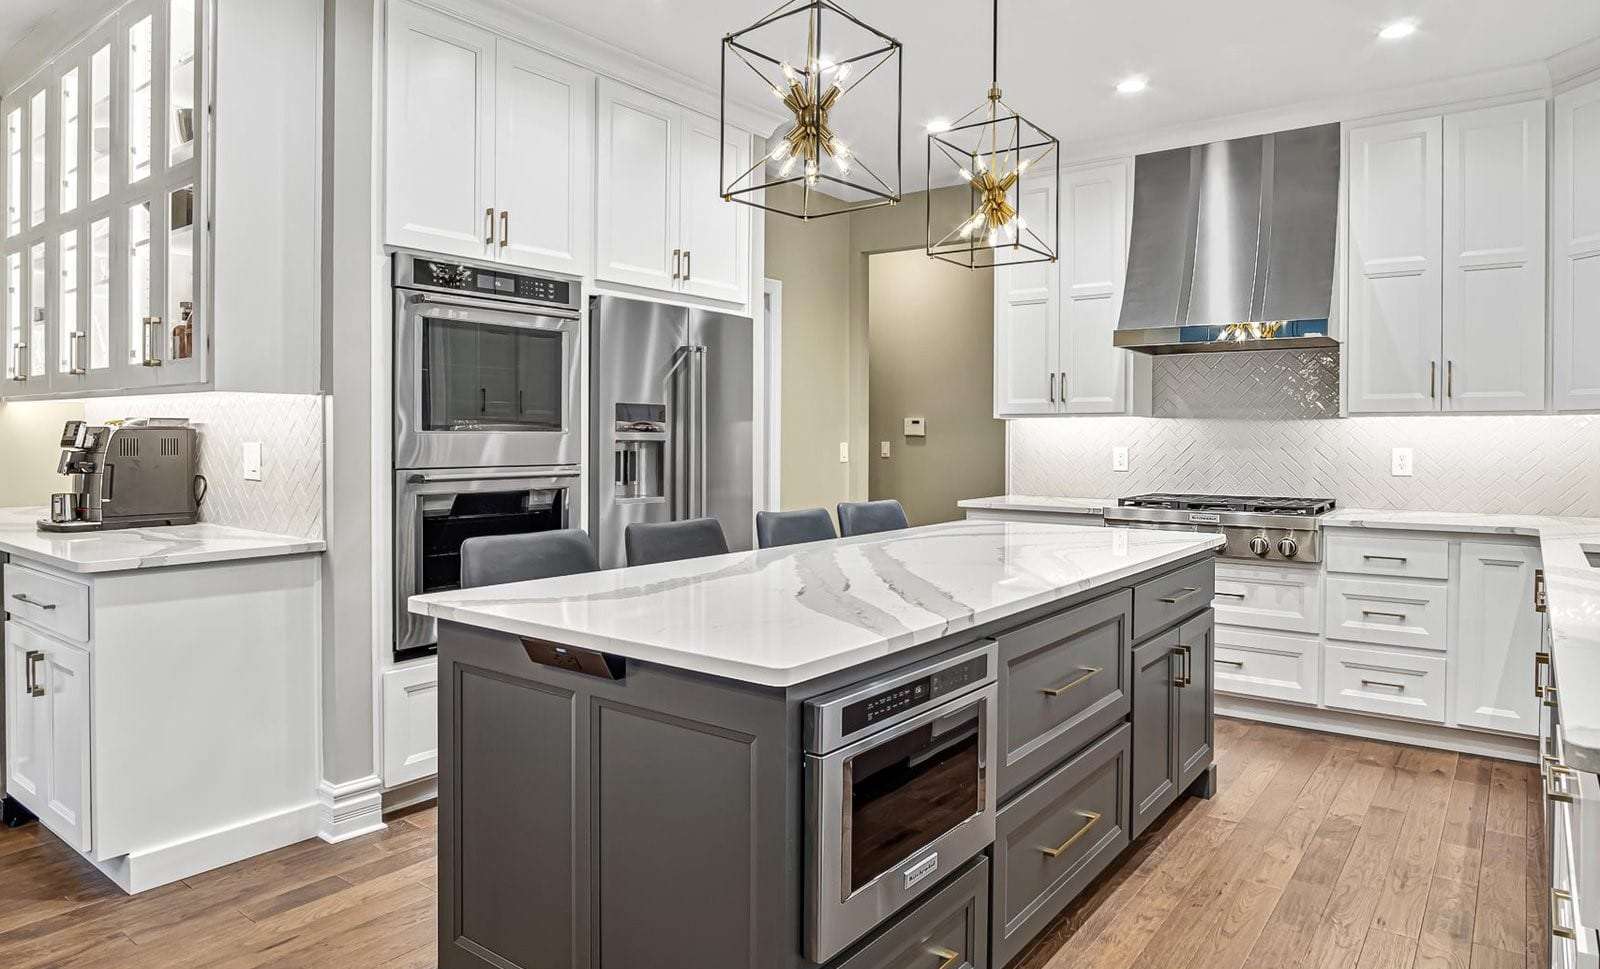 kitchen remodel is st louis with white perimeter cabinets and dark gray island cabinets with large stainless steel hood with polished accents.